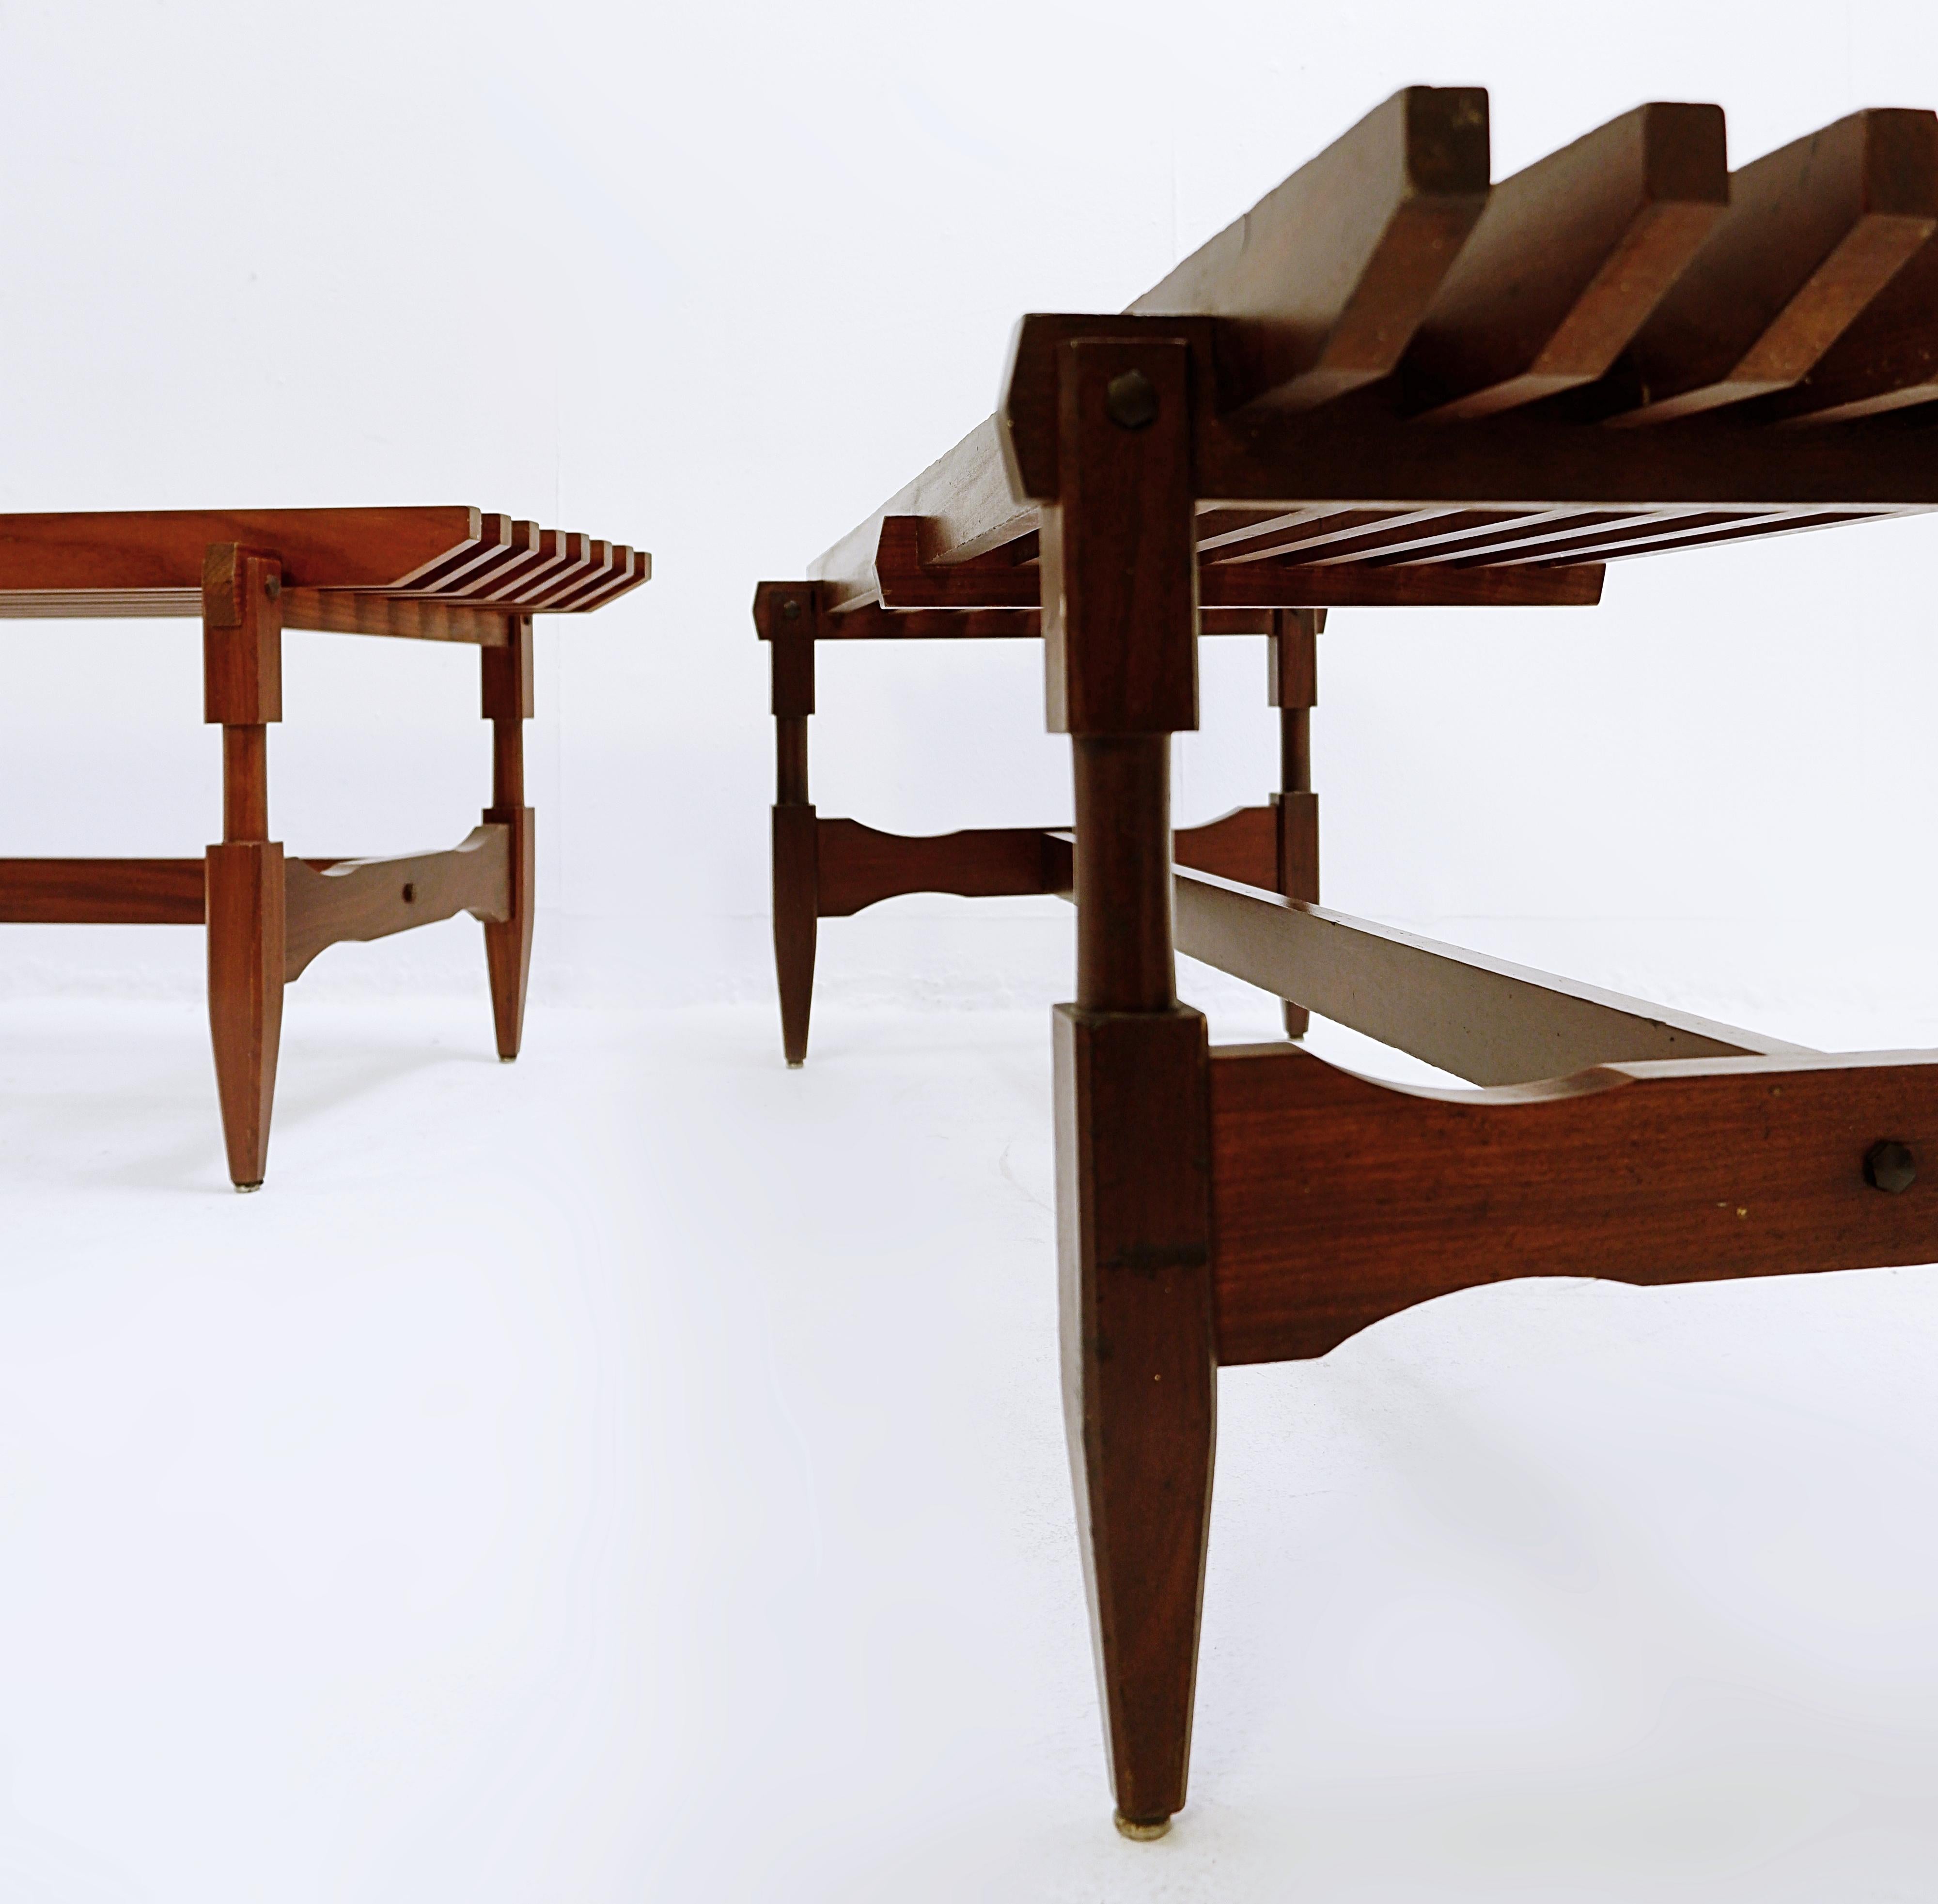 20th Century Pair of Mid-century wood Bench by Ico & Luisa Parisi - 1950s For Sale